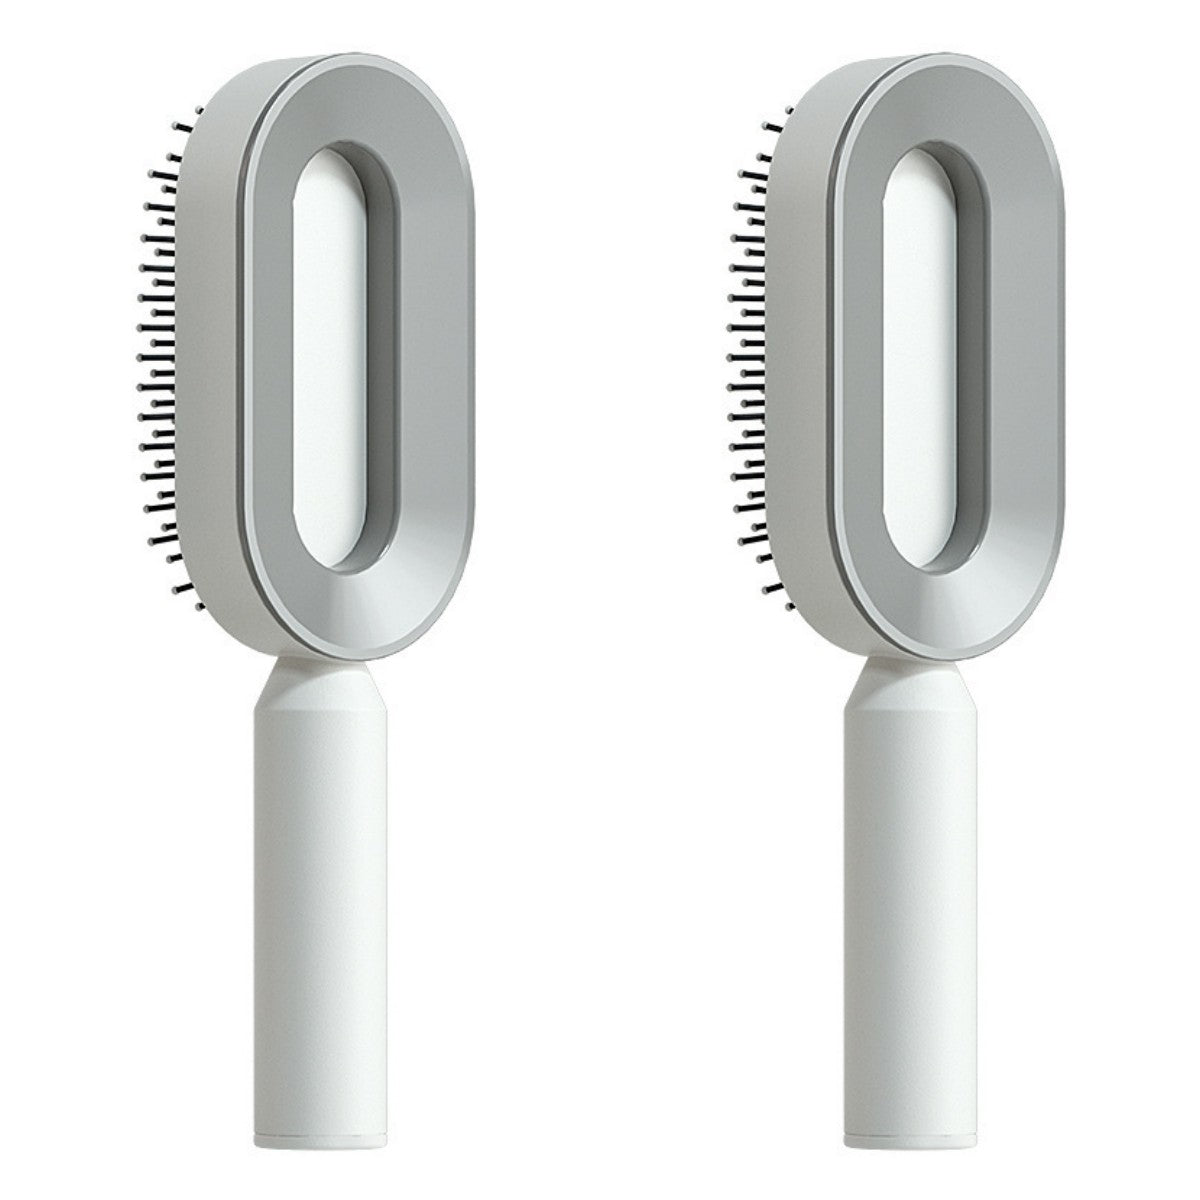 Self Cleaning Hair Brush For Women One-key Cleaning Hair Loss